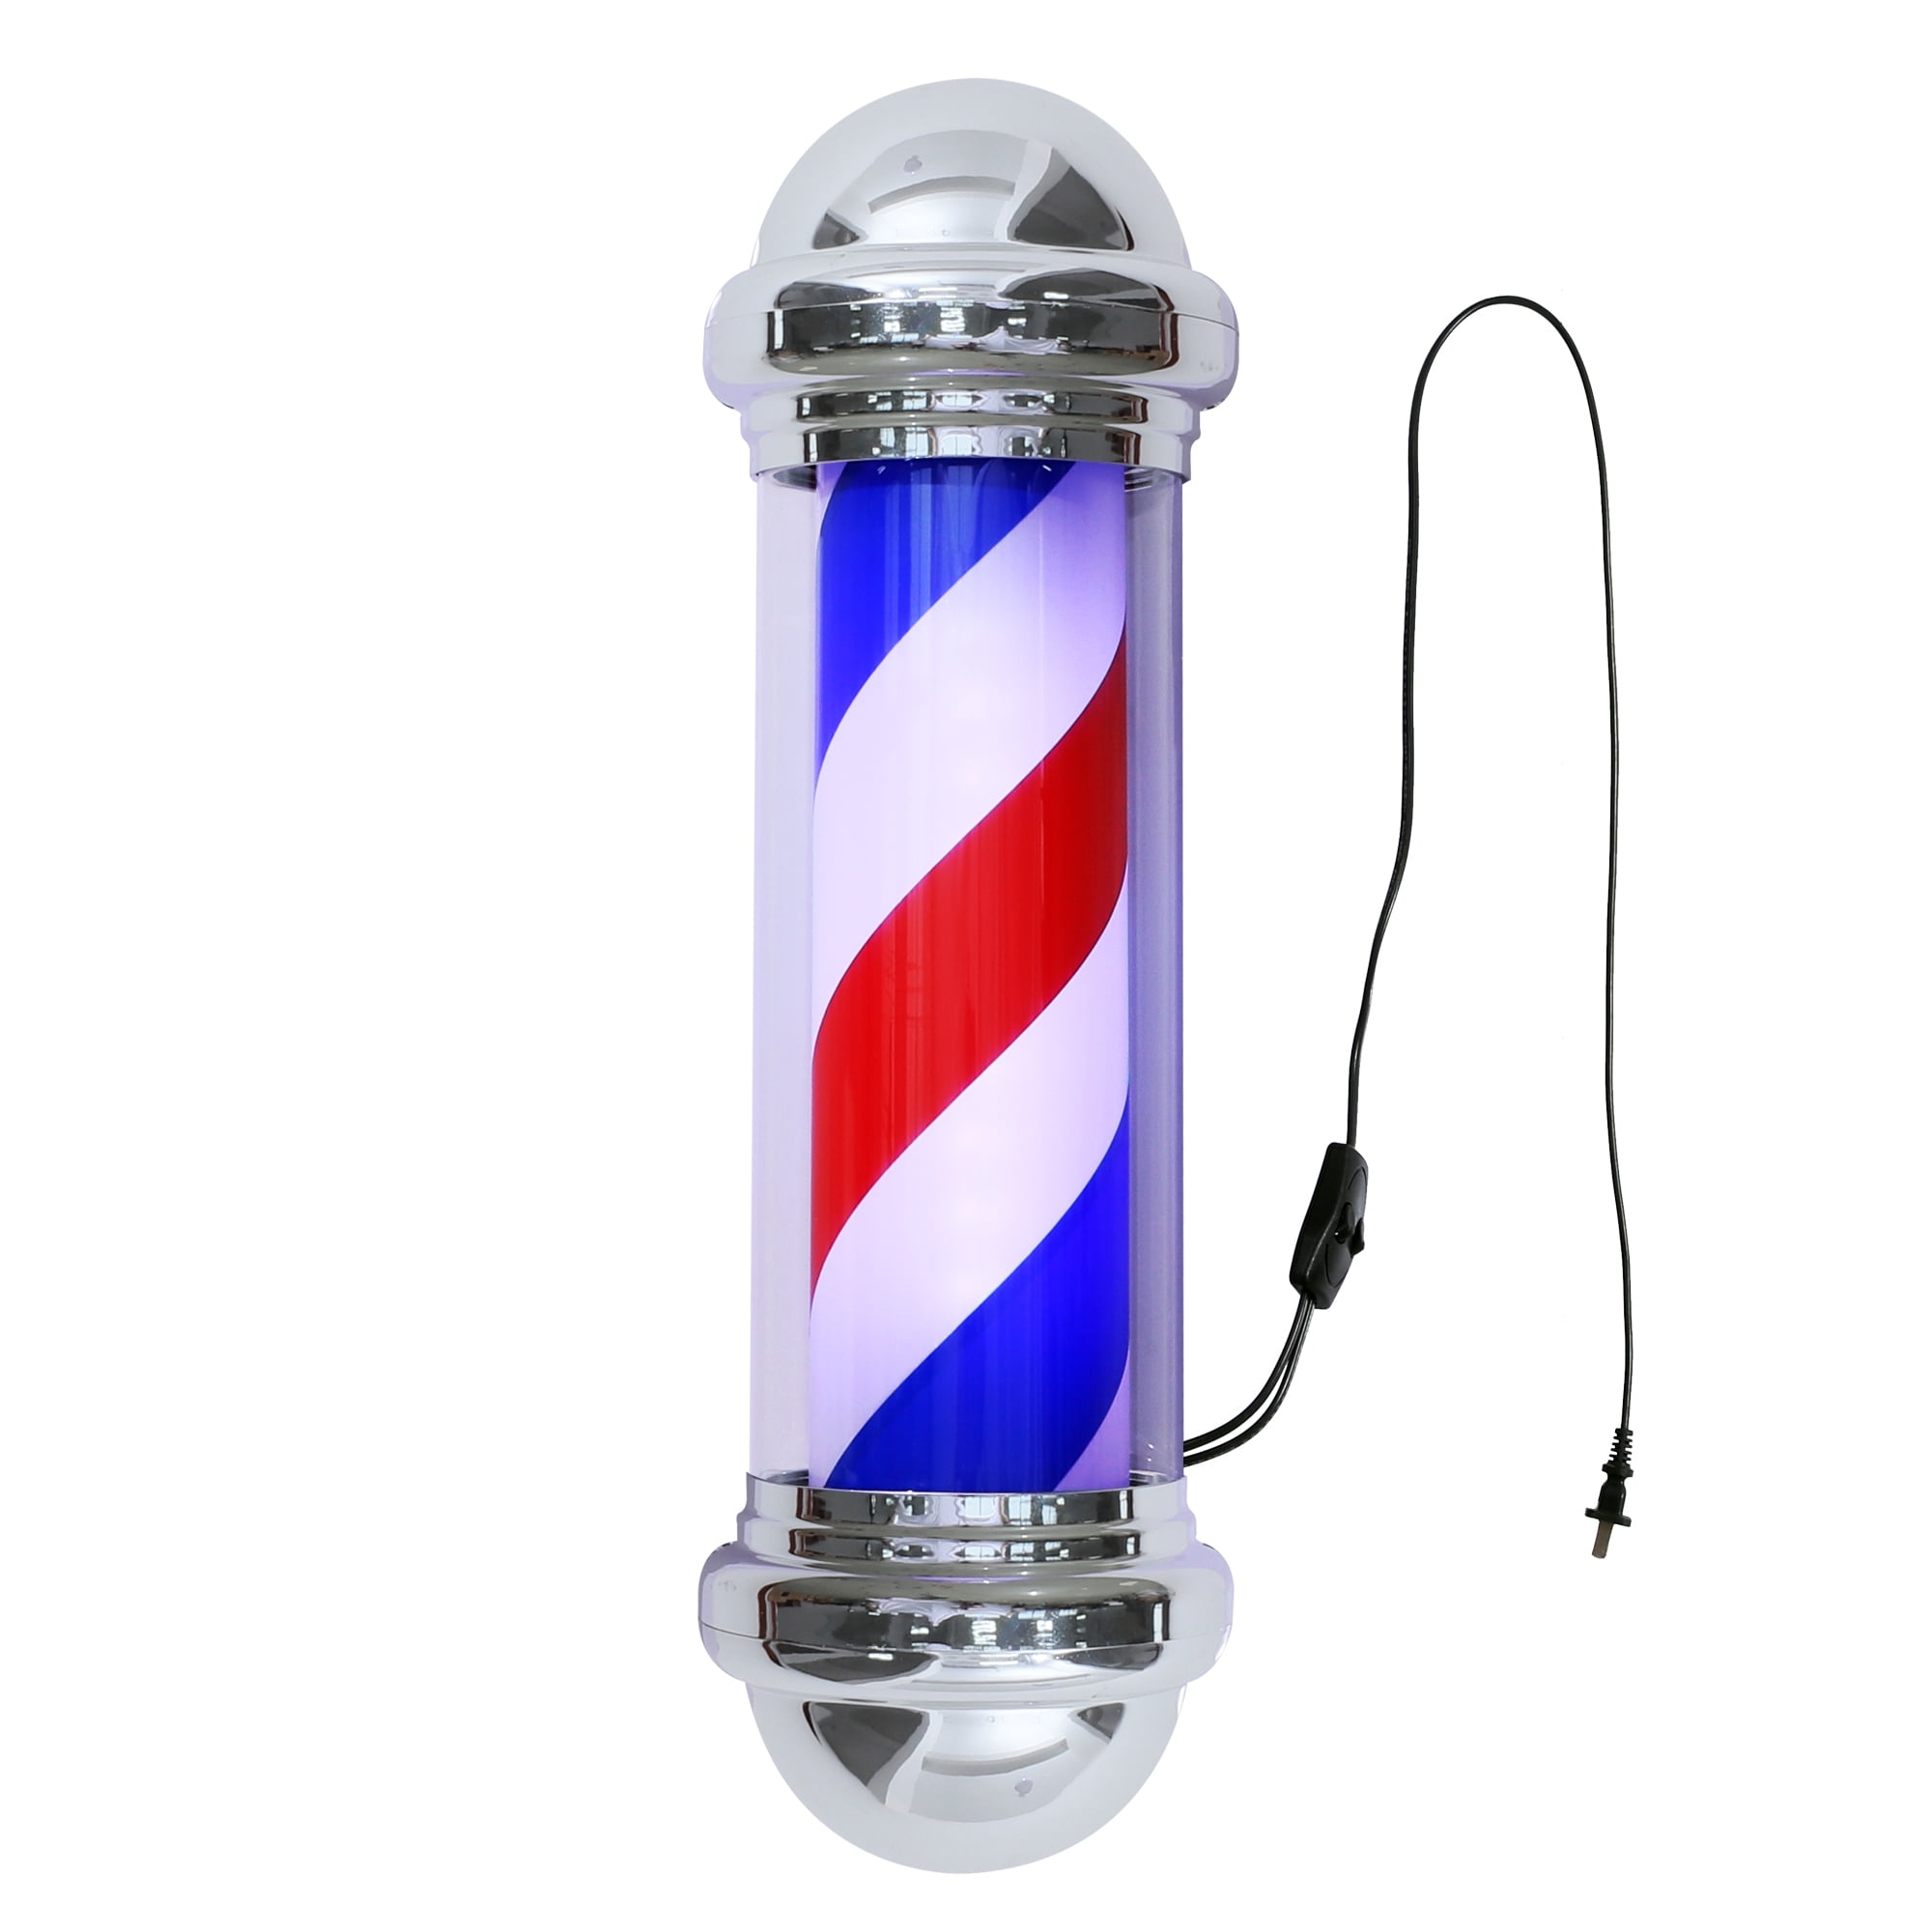 Details about  / Barber Poles Display Hair Cut NEW Light Sign home decor crafts